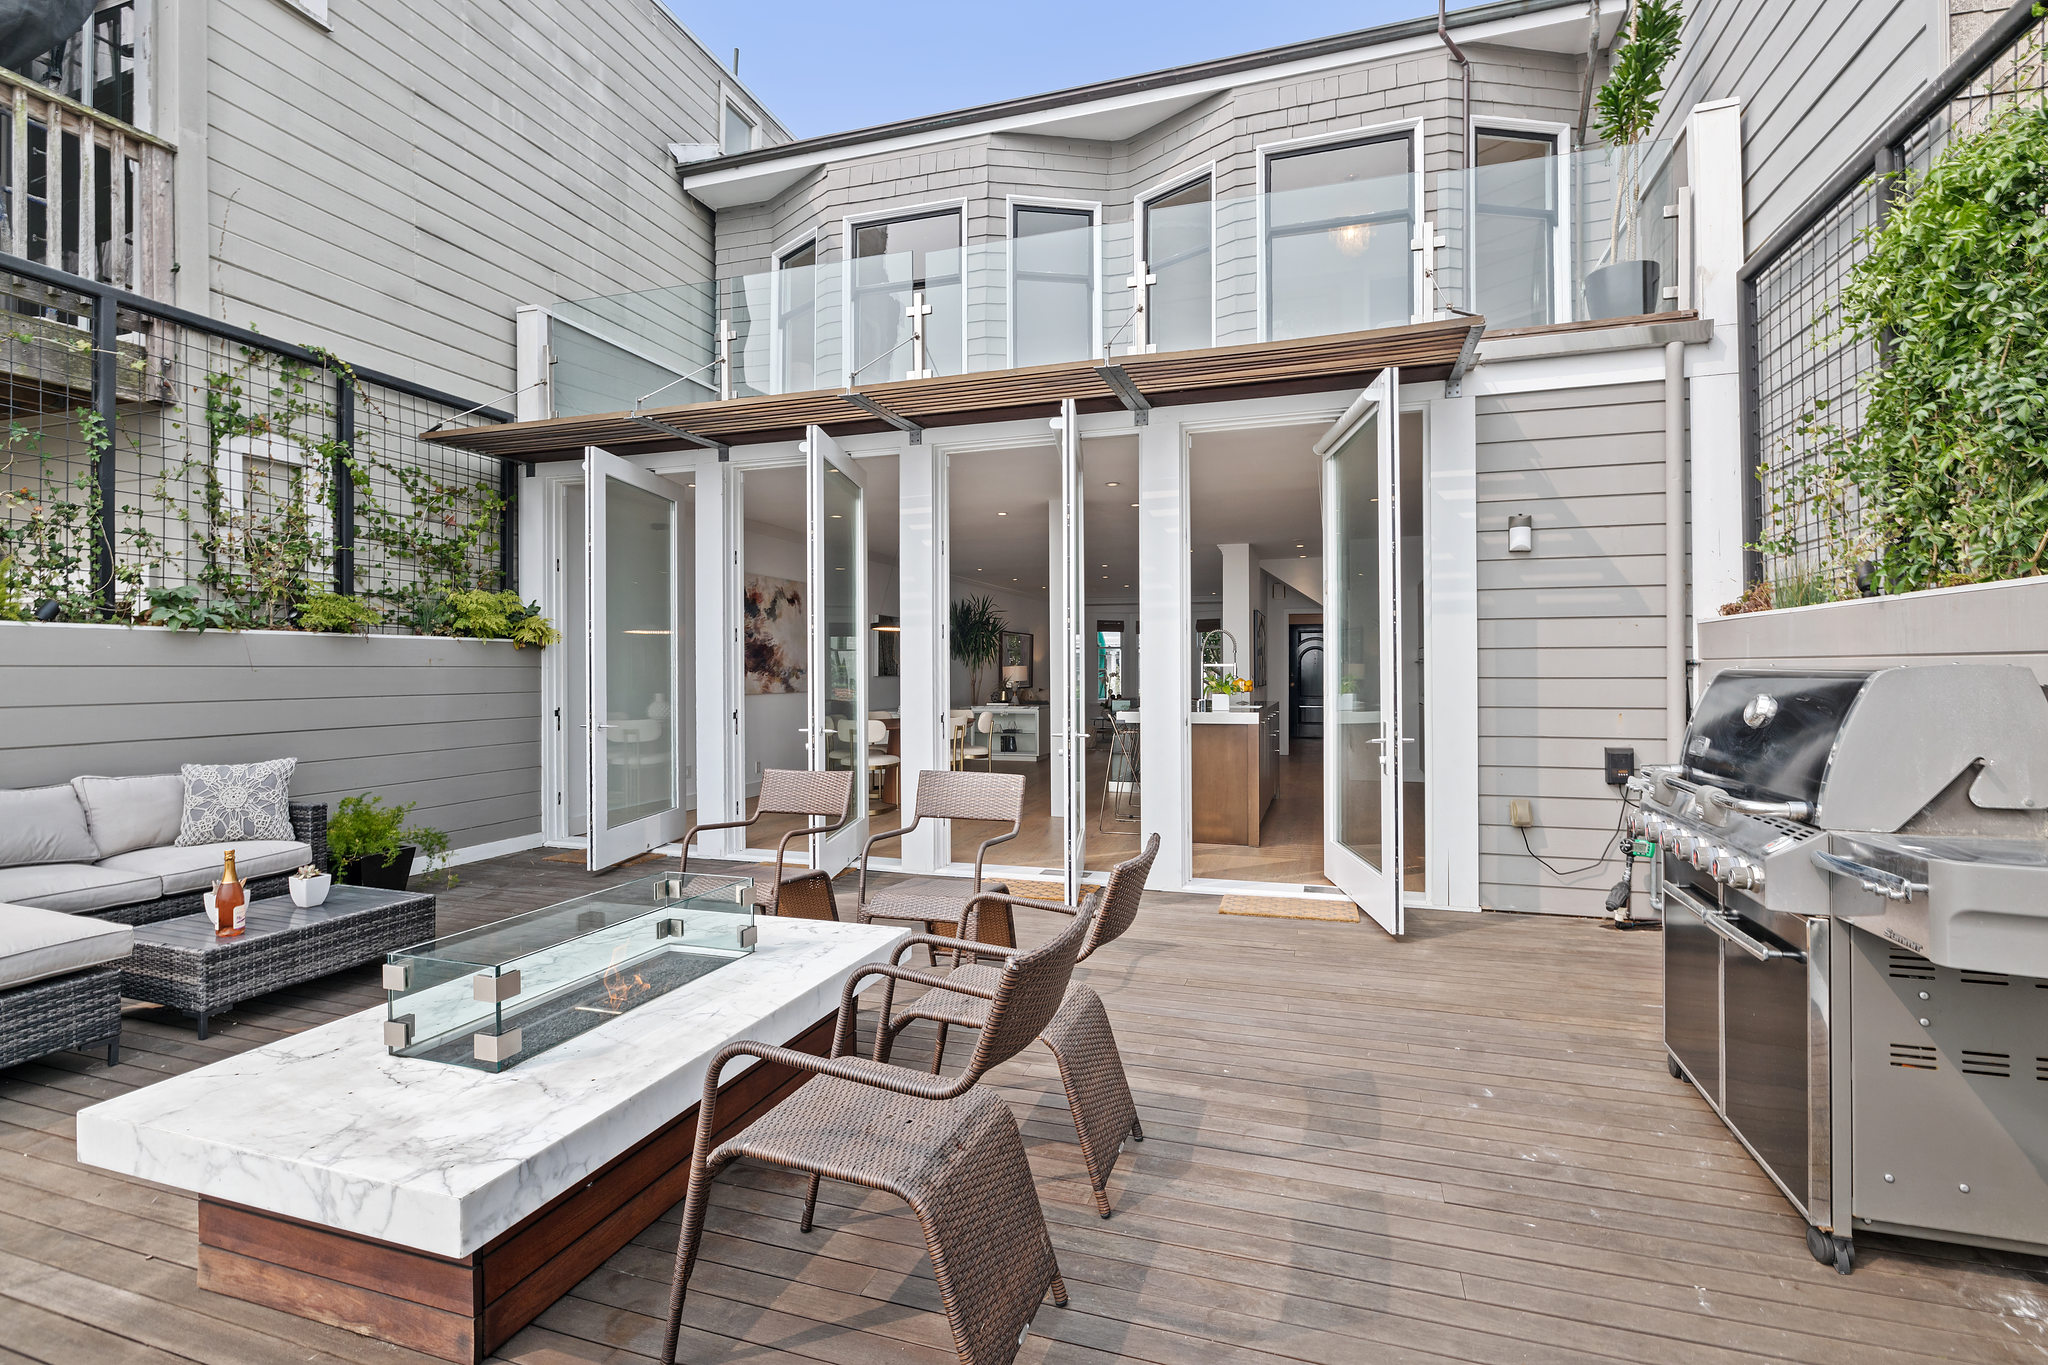 Property Photo: Upper patio at 55 Buena Vista Terrace, showing three sets of glass doors leading into the living area